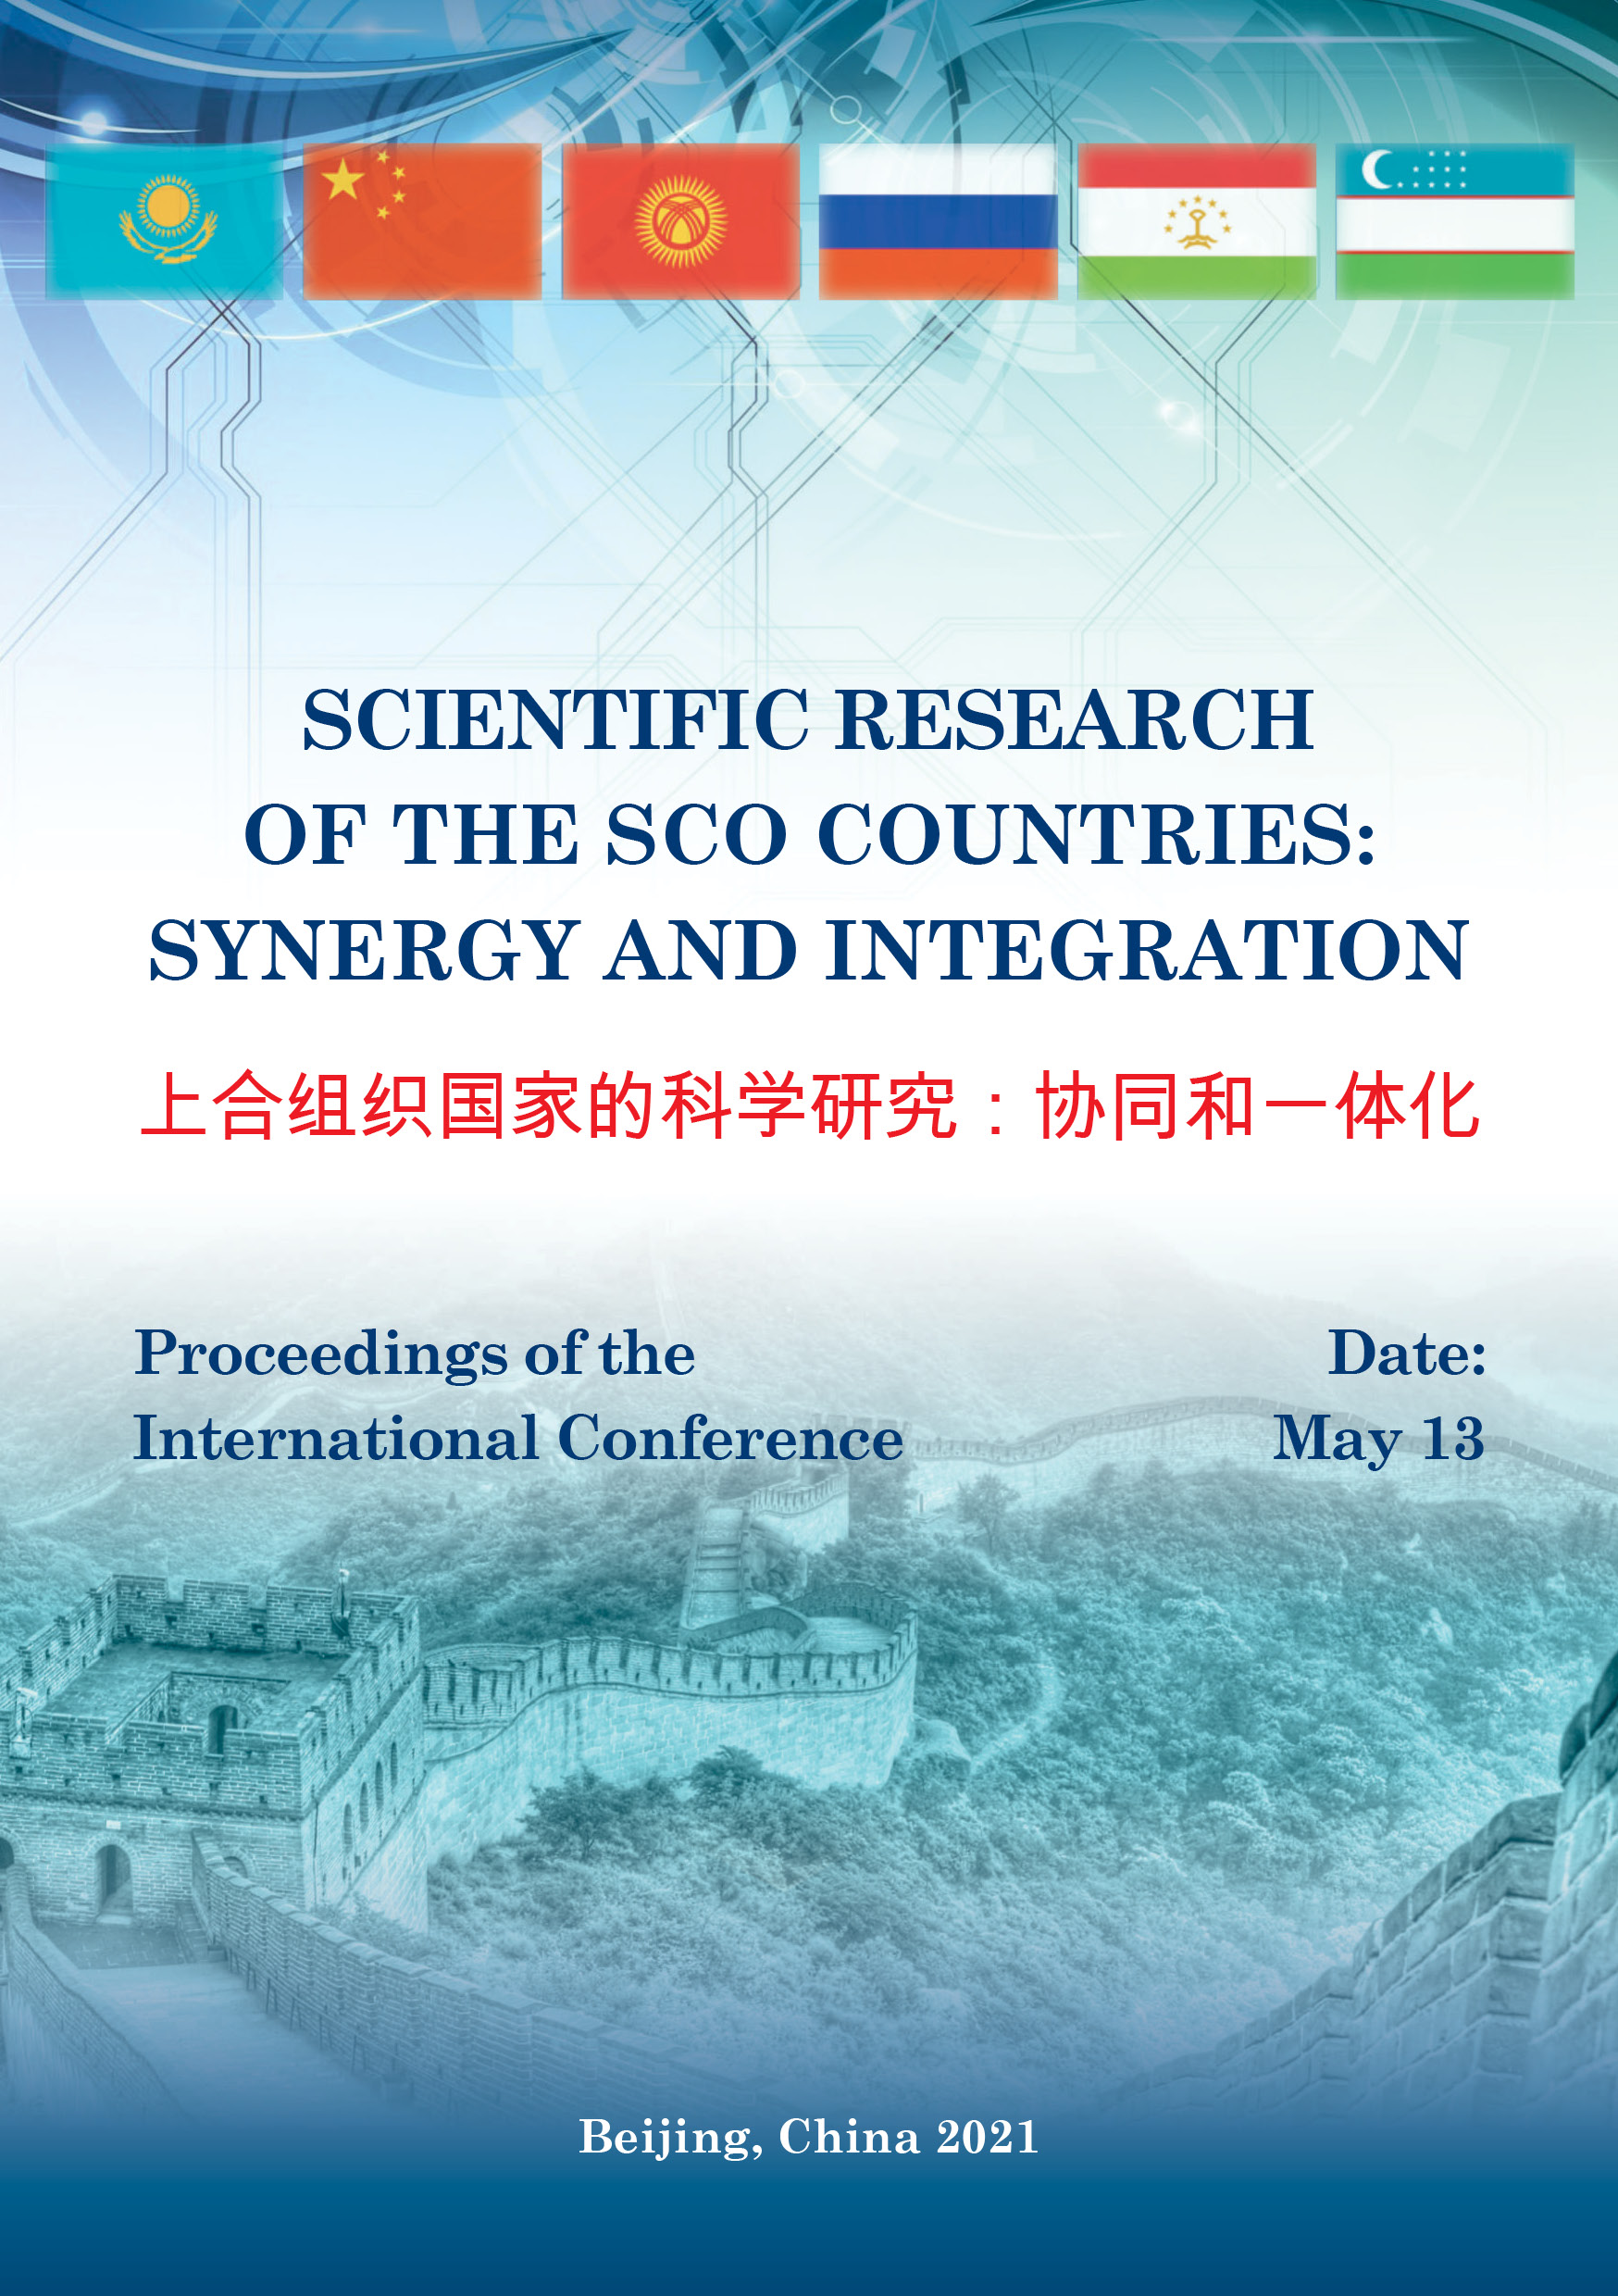             APPLICATION OF THE ACHIEVEMENTS OF NATURAL SCIENCES IN FORENSIC RESEARCH
    